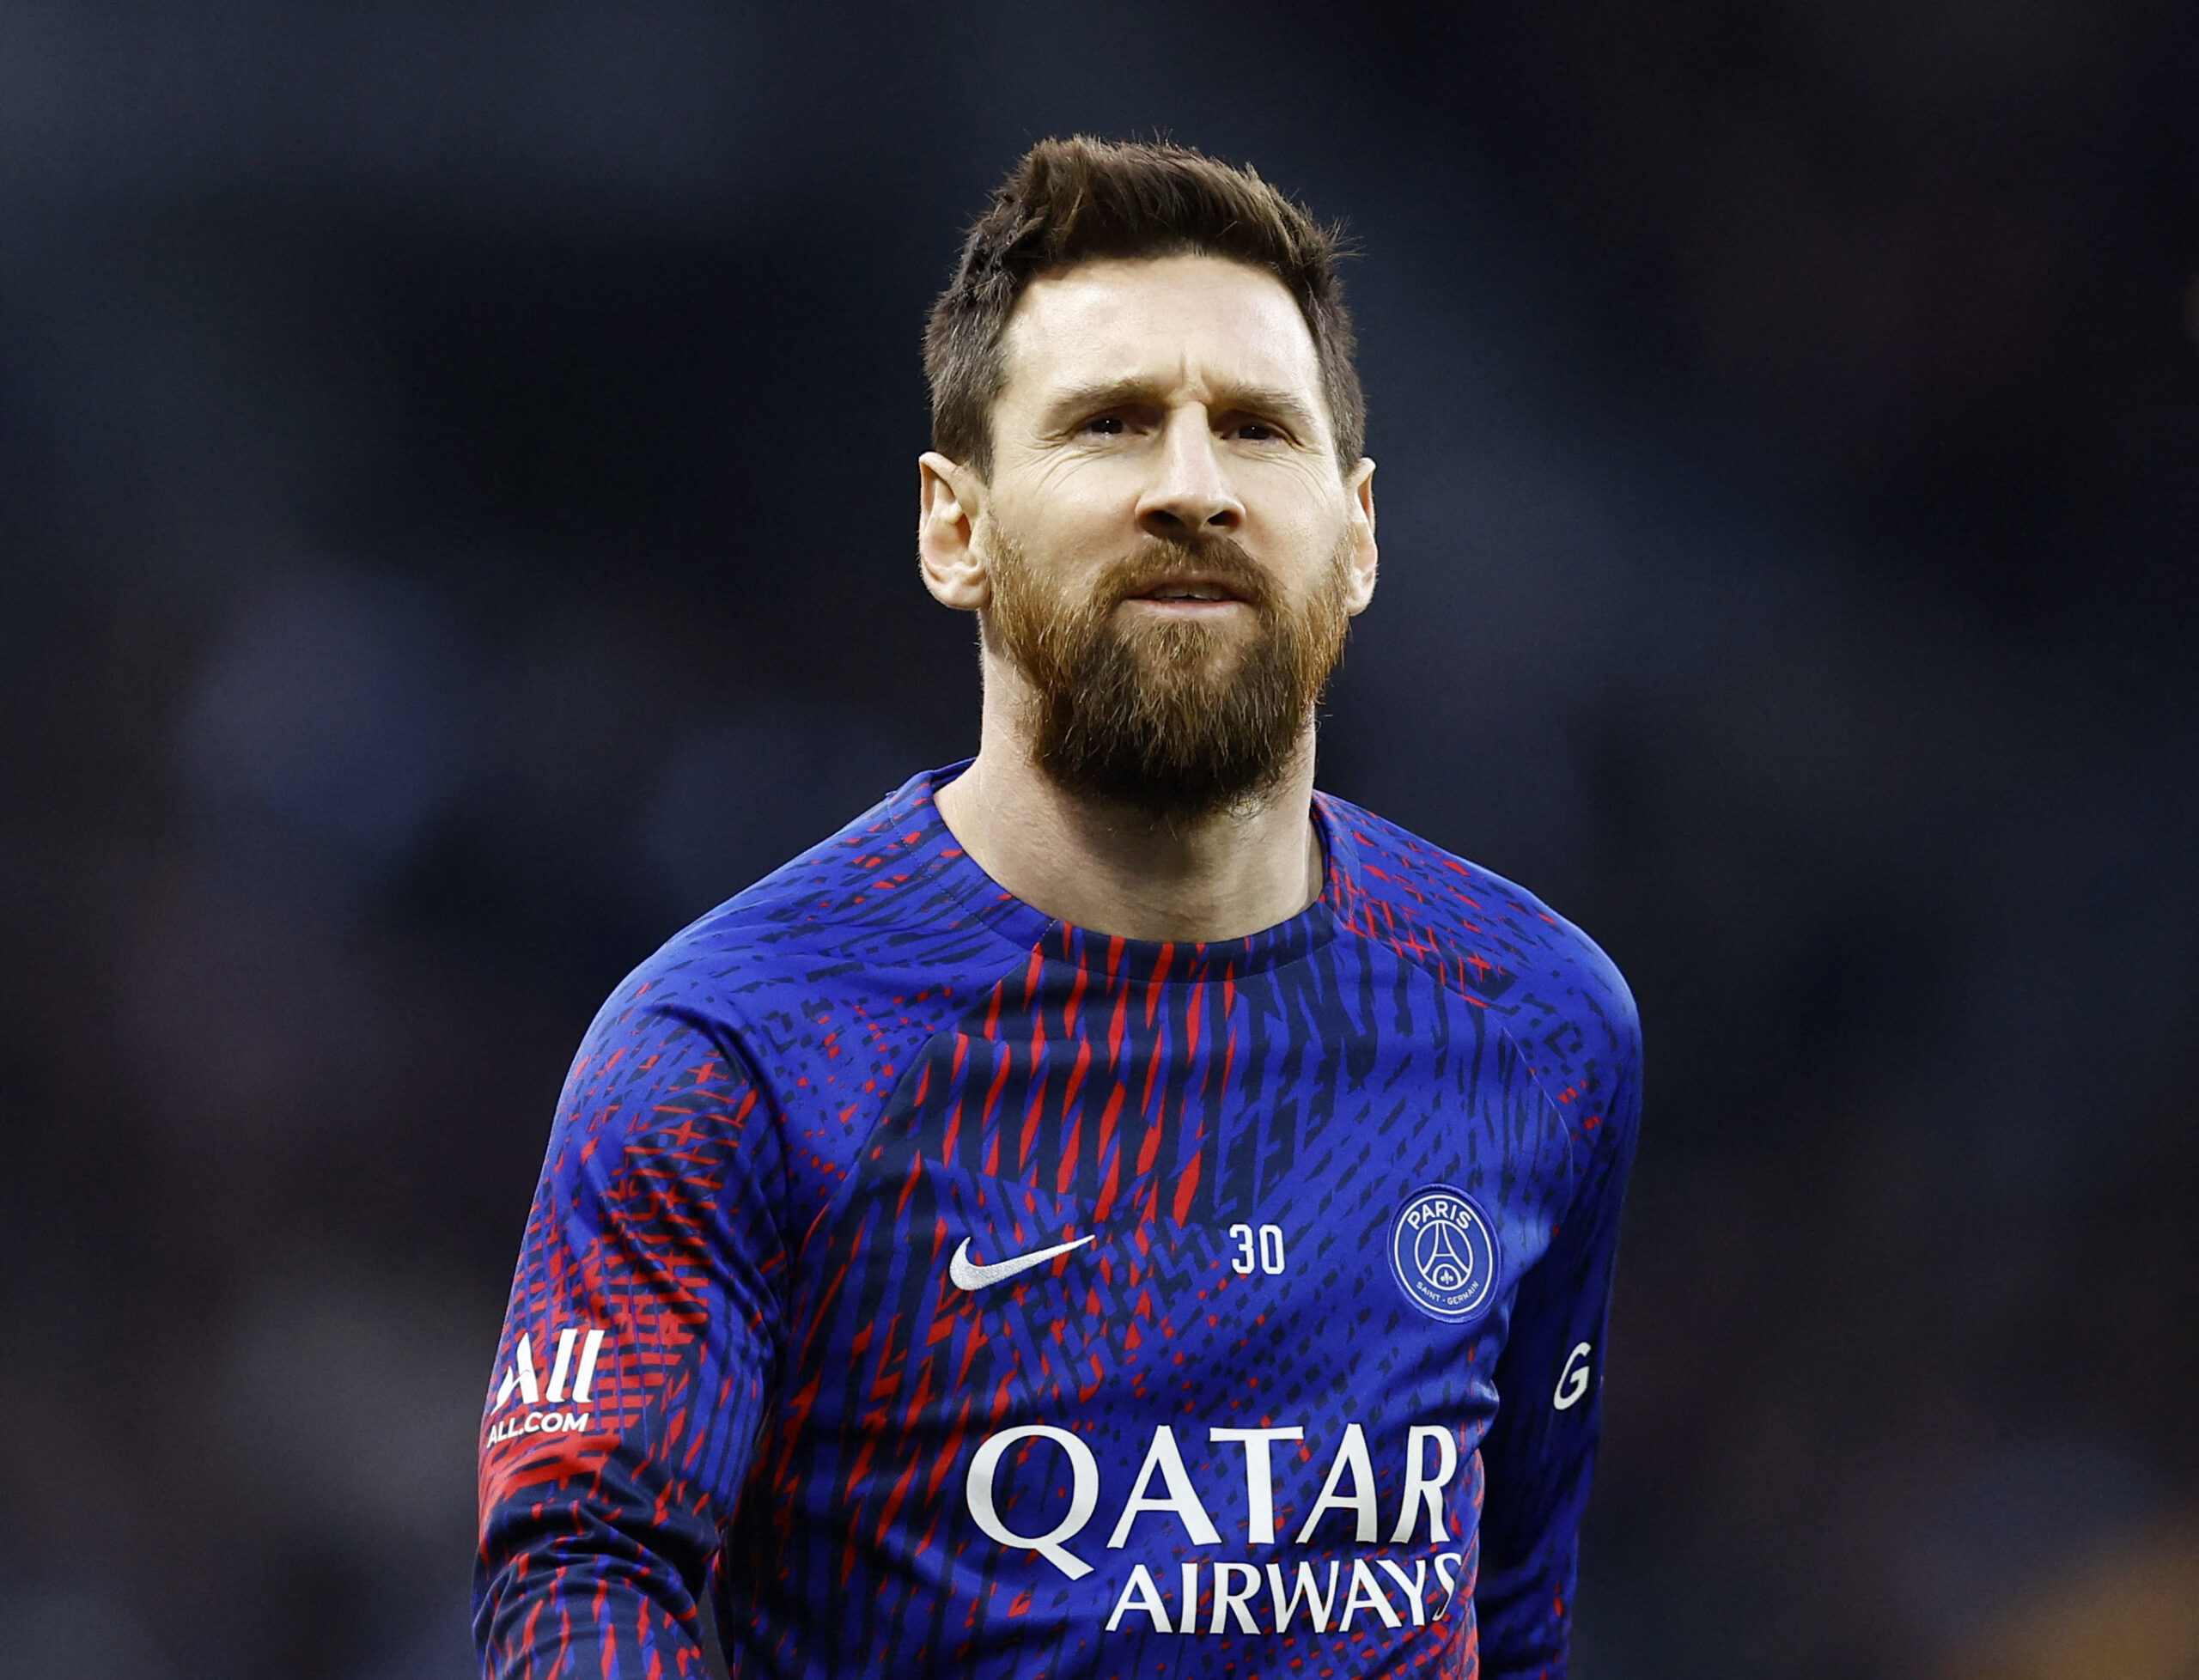 I WON’T PARTICIPATE IN THE NEXT WORLD CUP – LEO MESSI